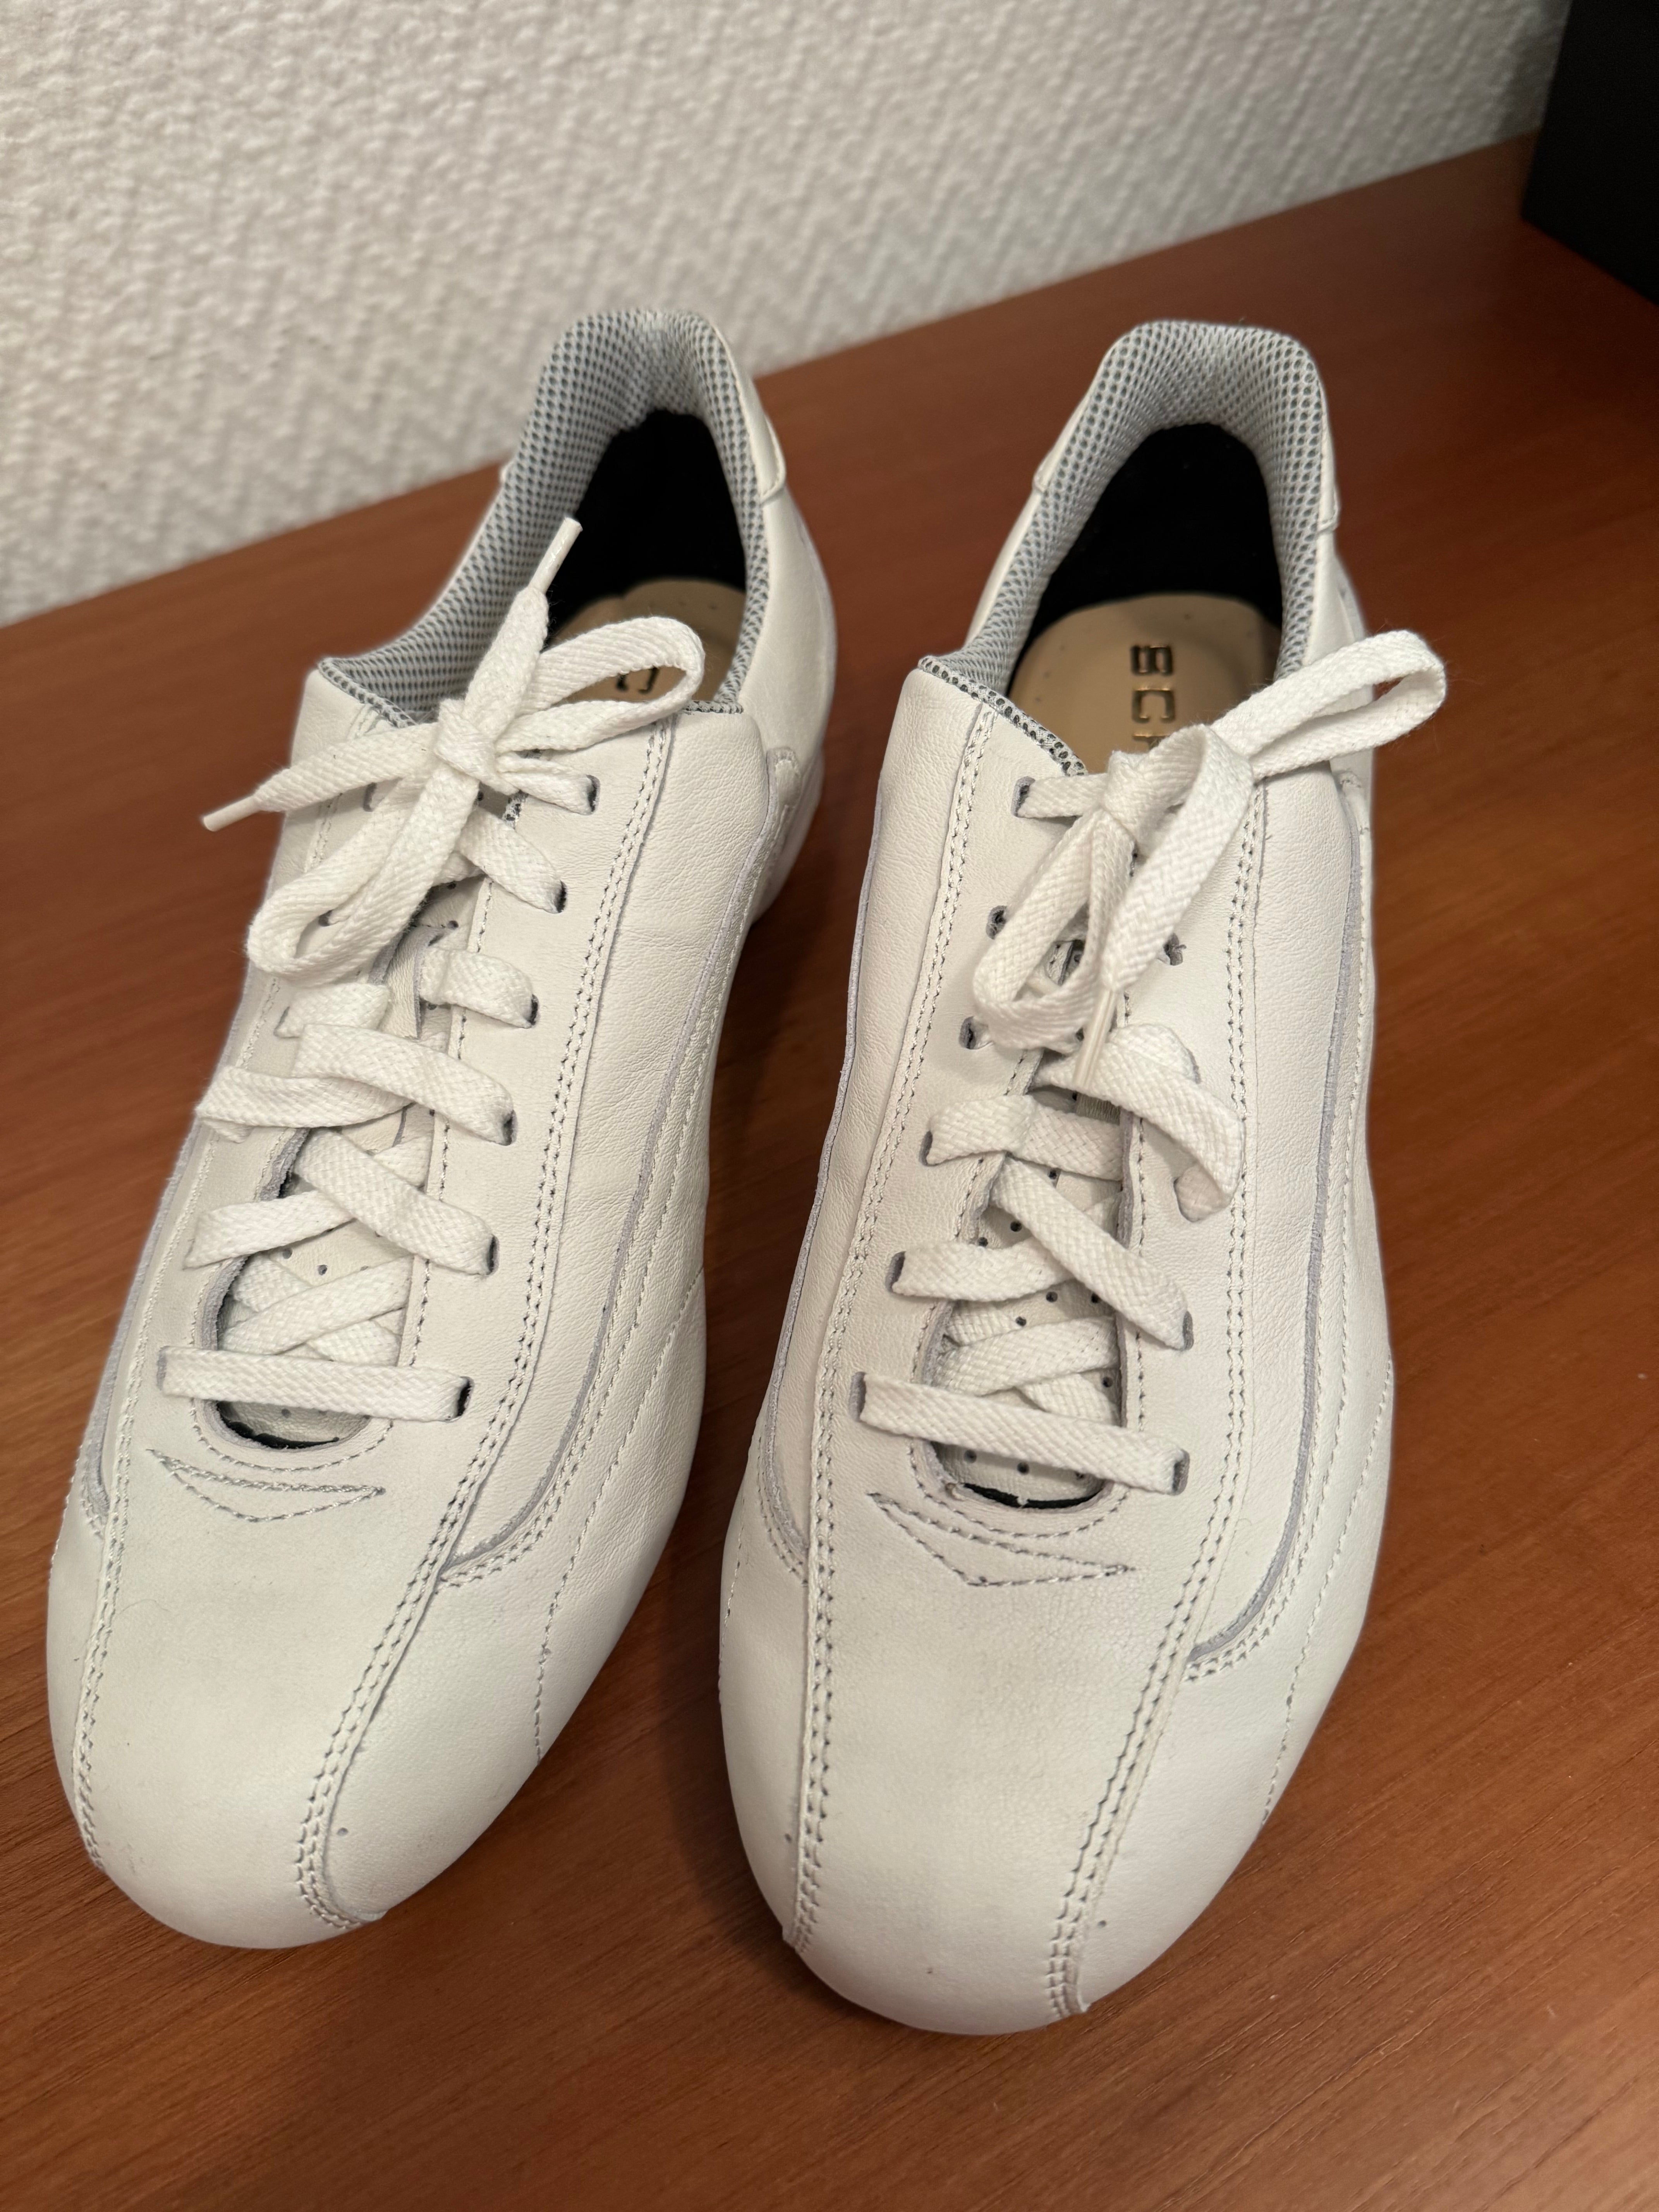 Dance sneakers nappa leather white